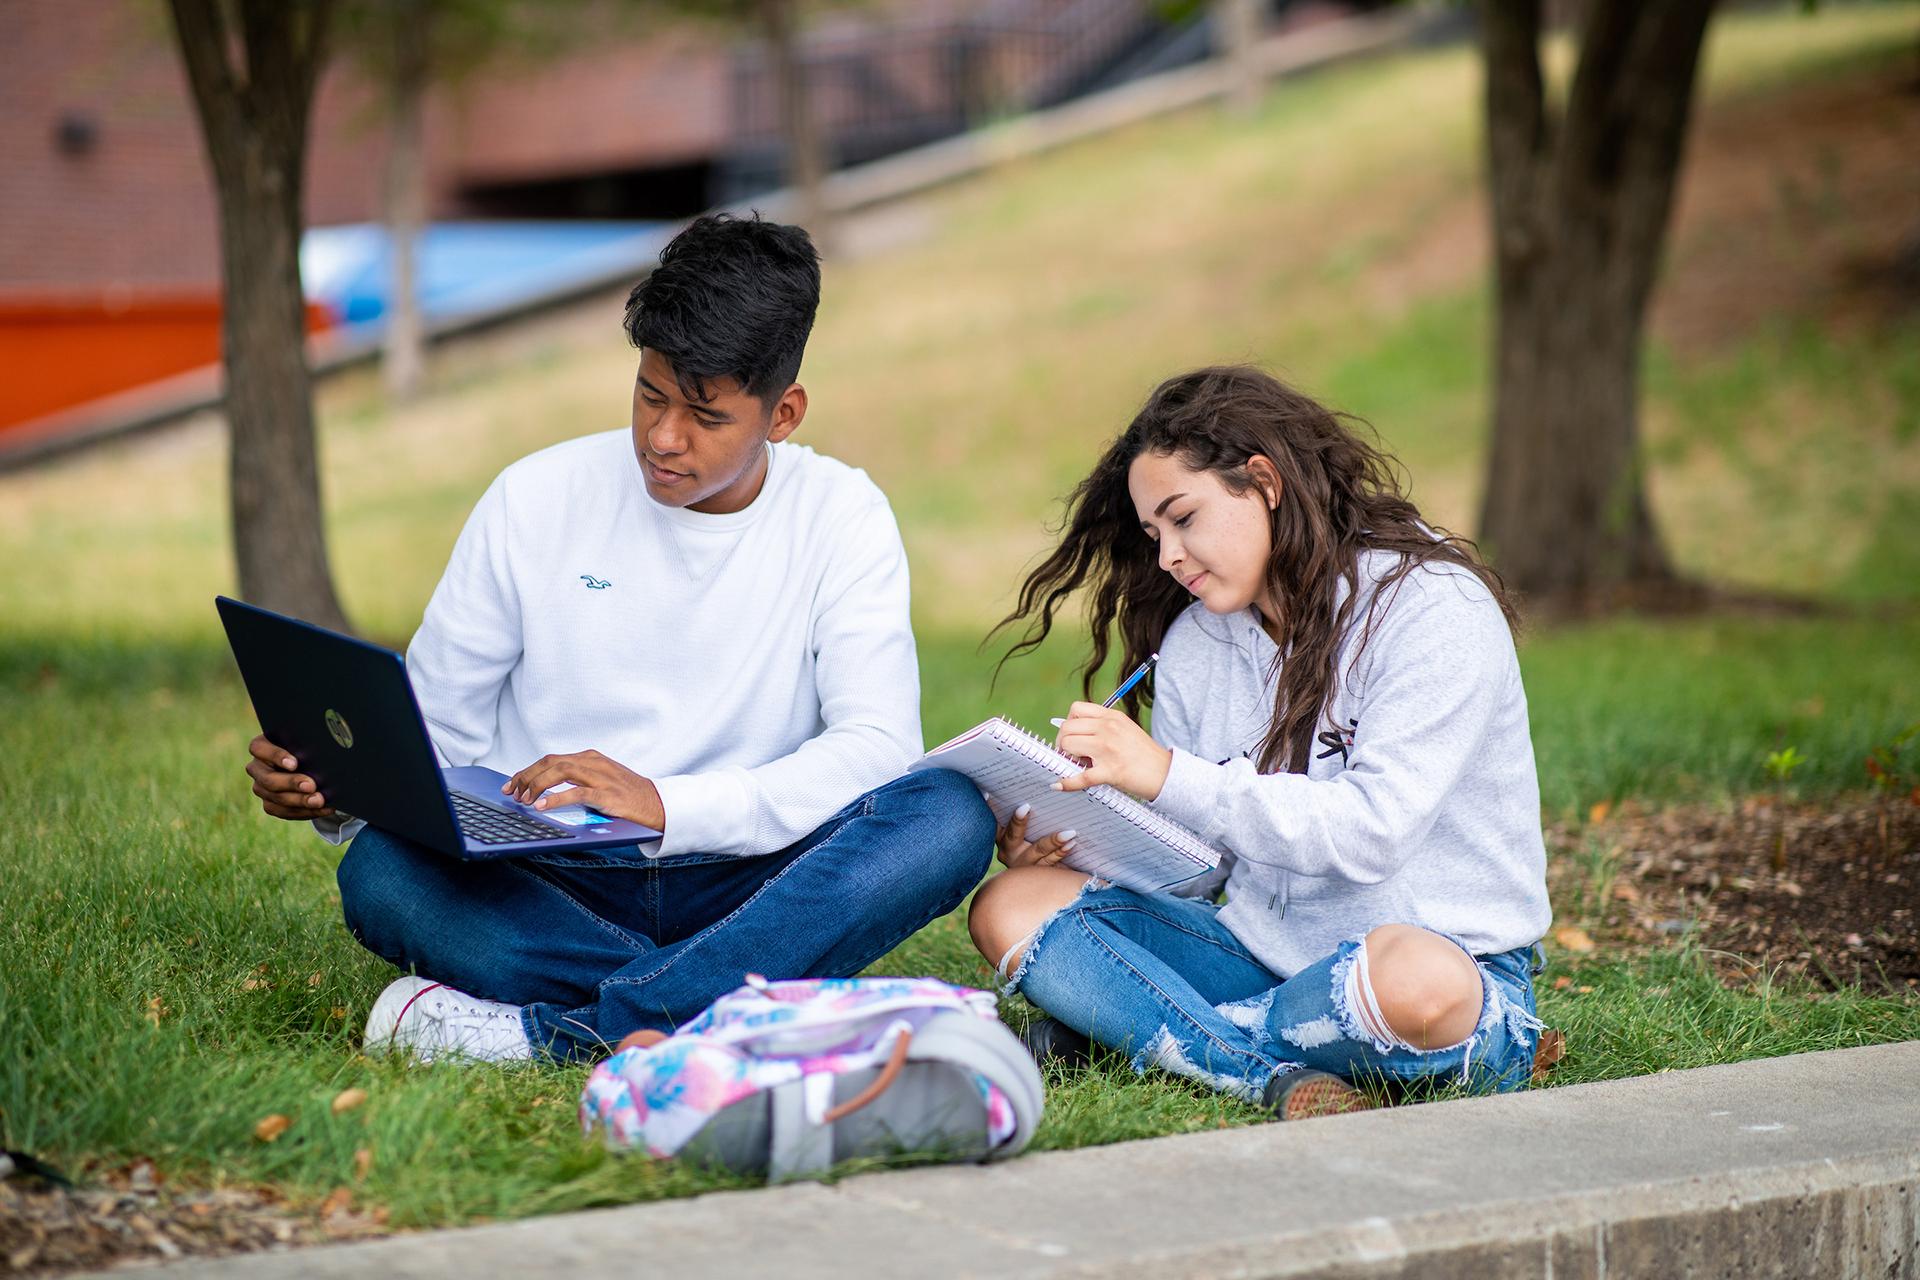 Two young students studying in a grassy area